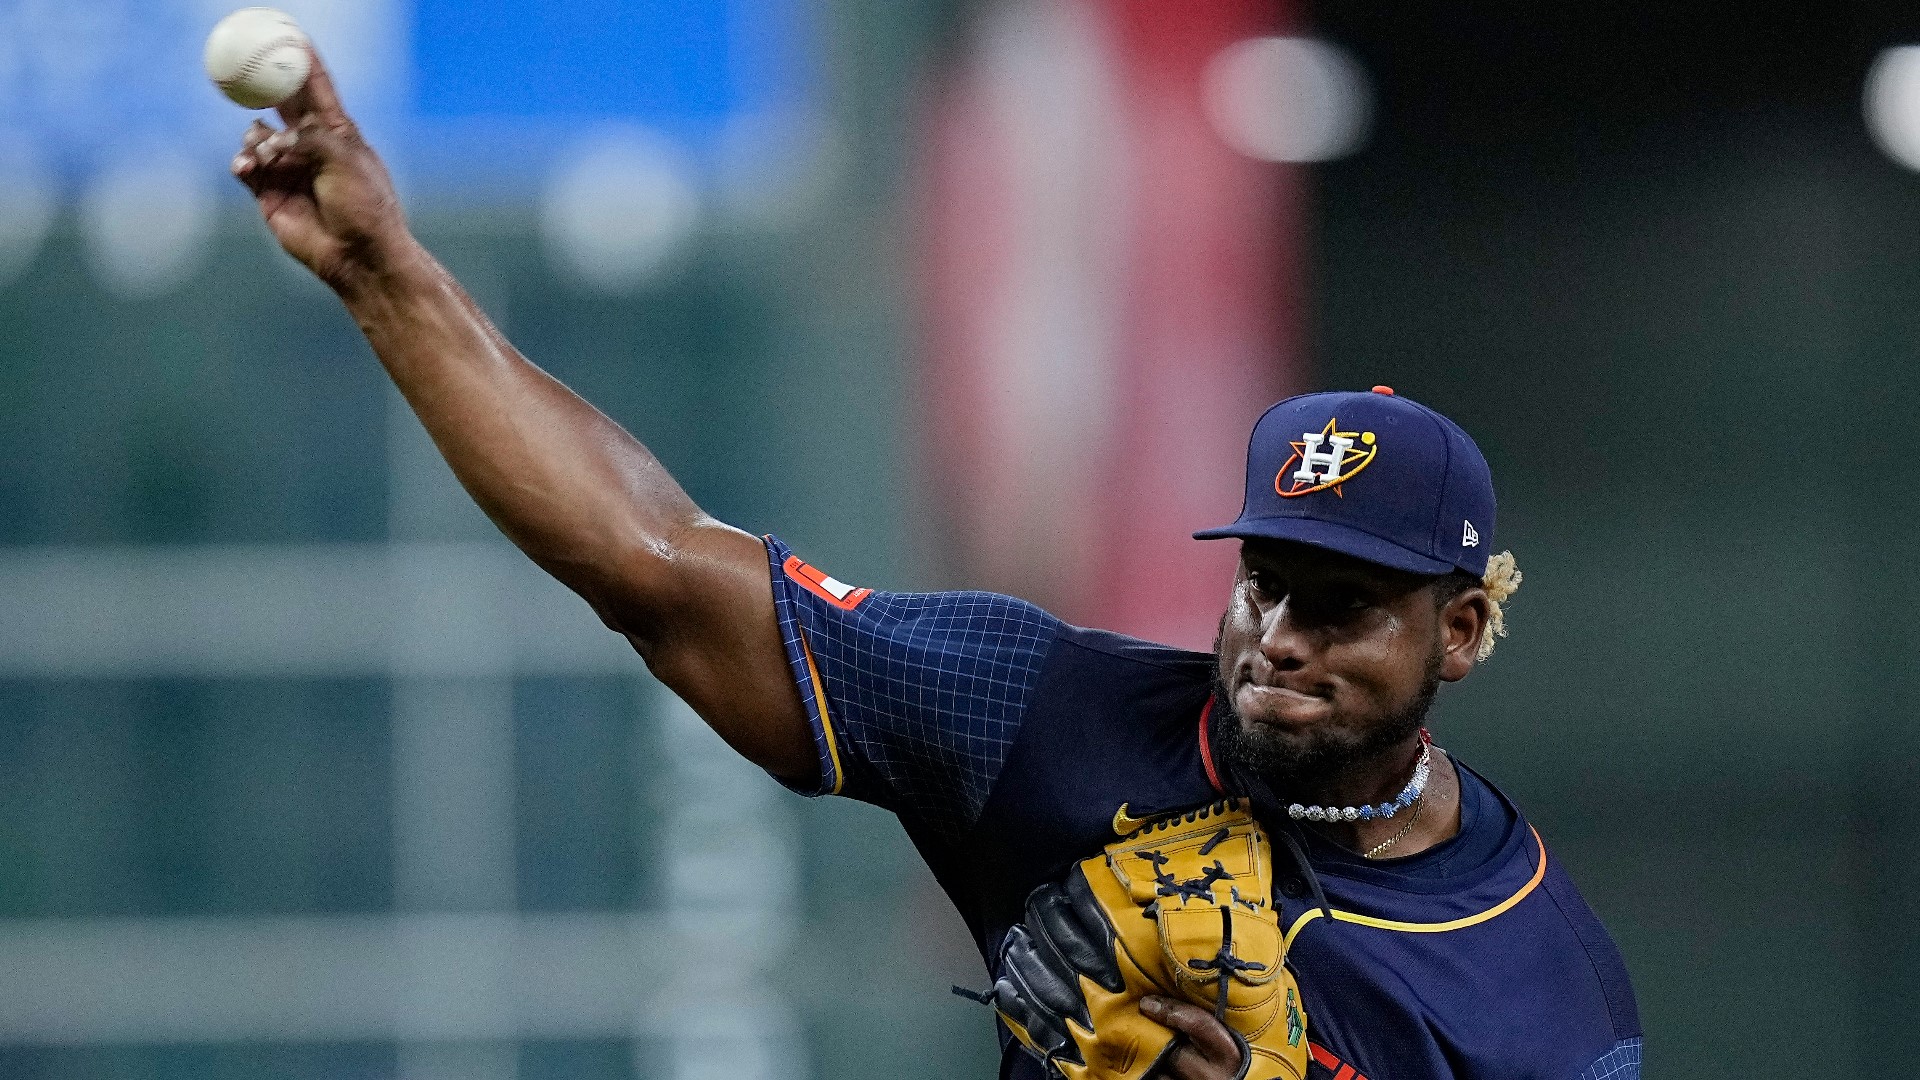 Who his Ronel Blanco? Astros pitcher tosses nohitter